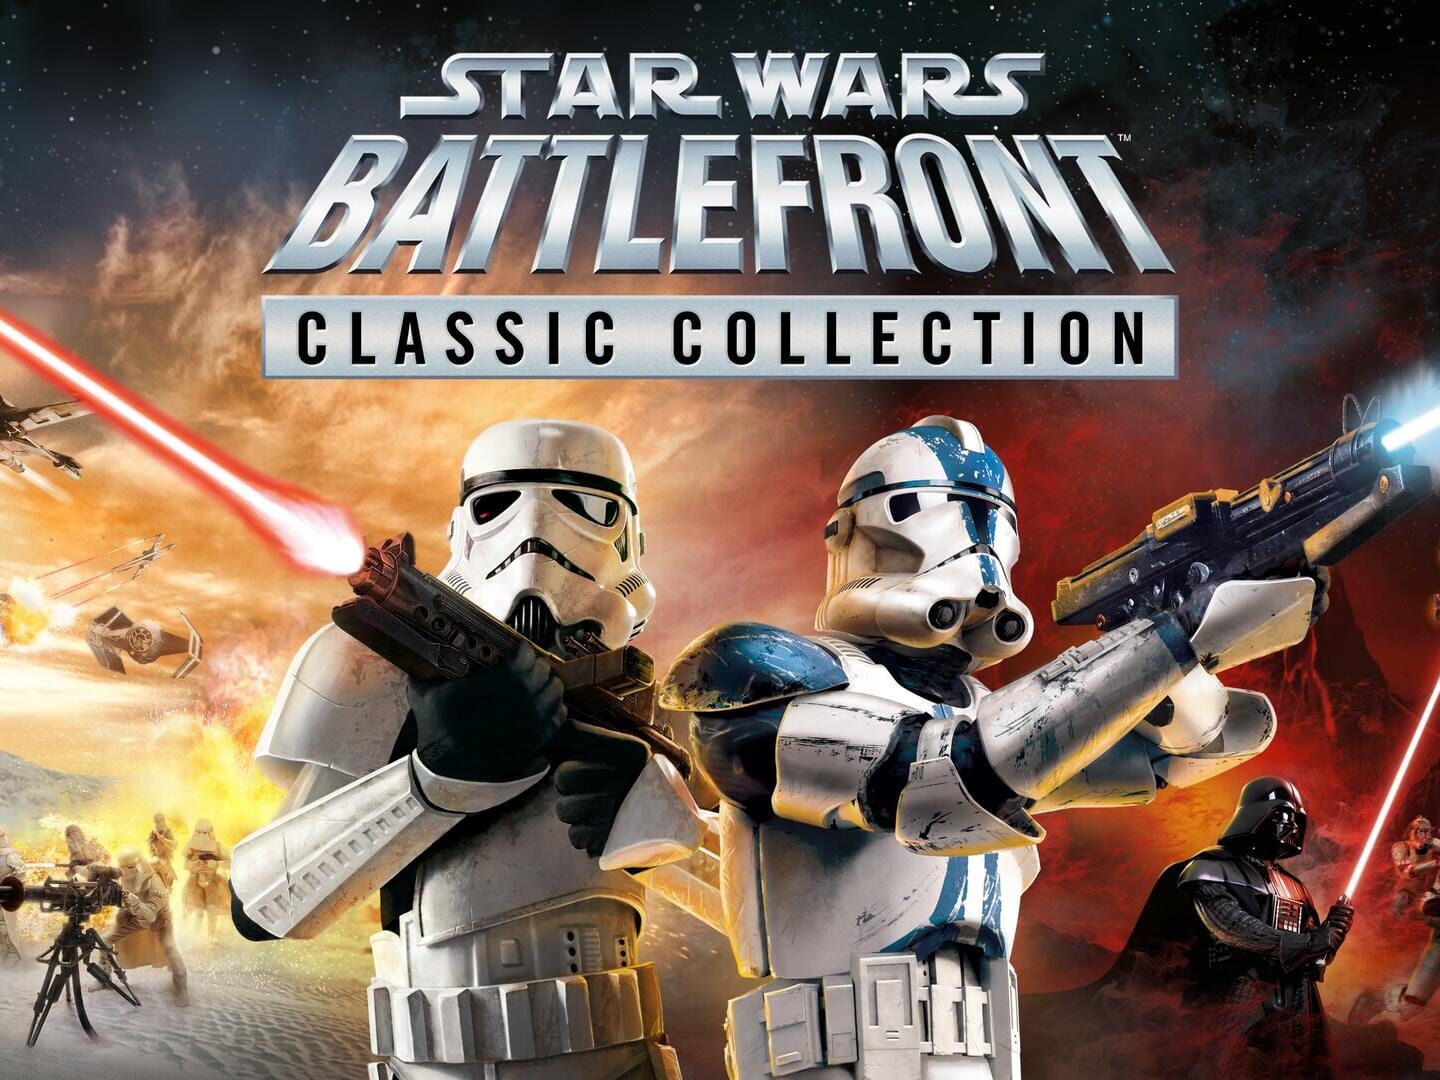 Star Wars: Battlefront Classic Collection artwork